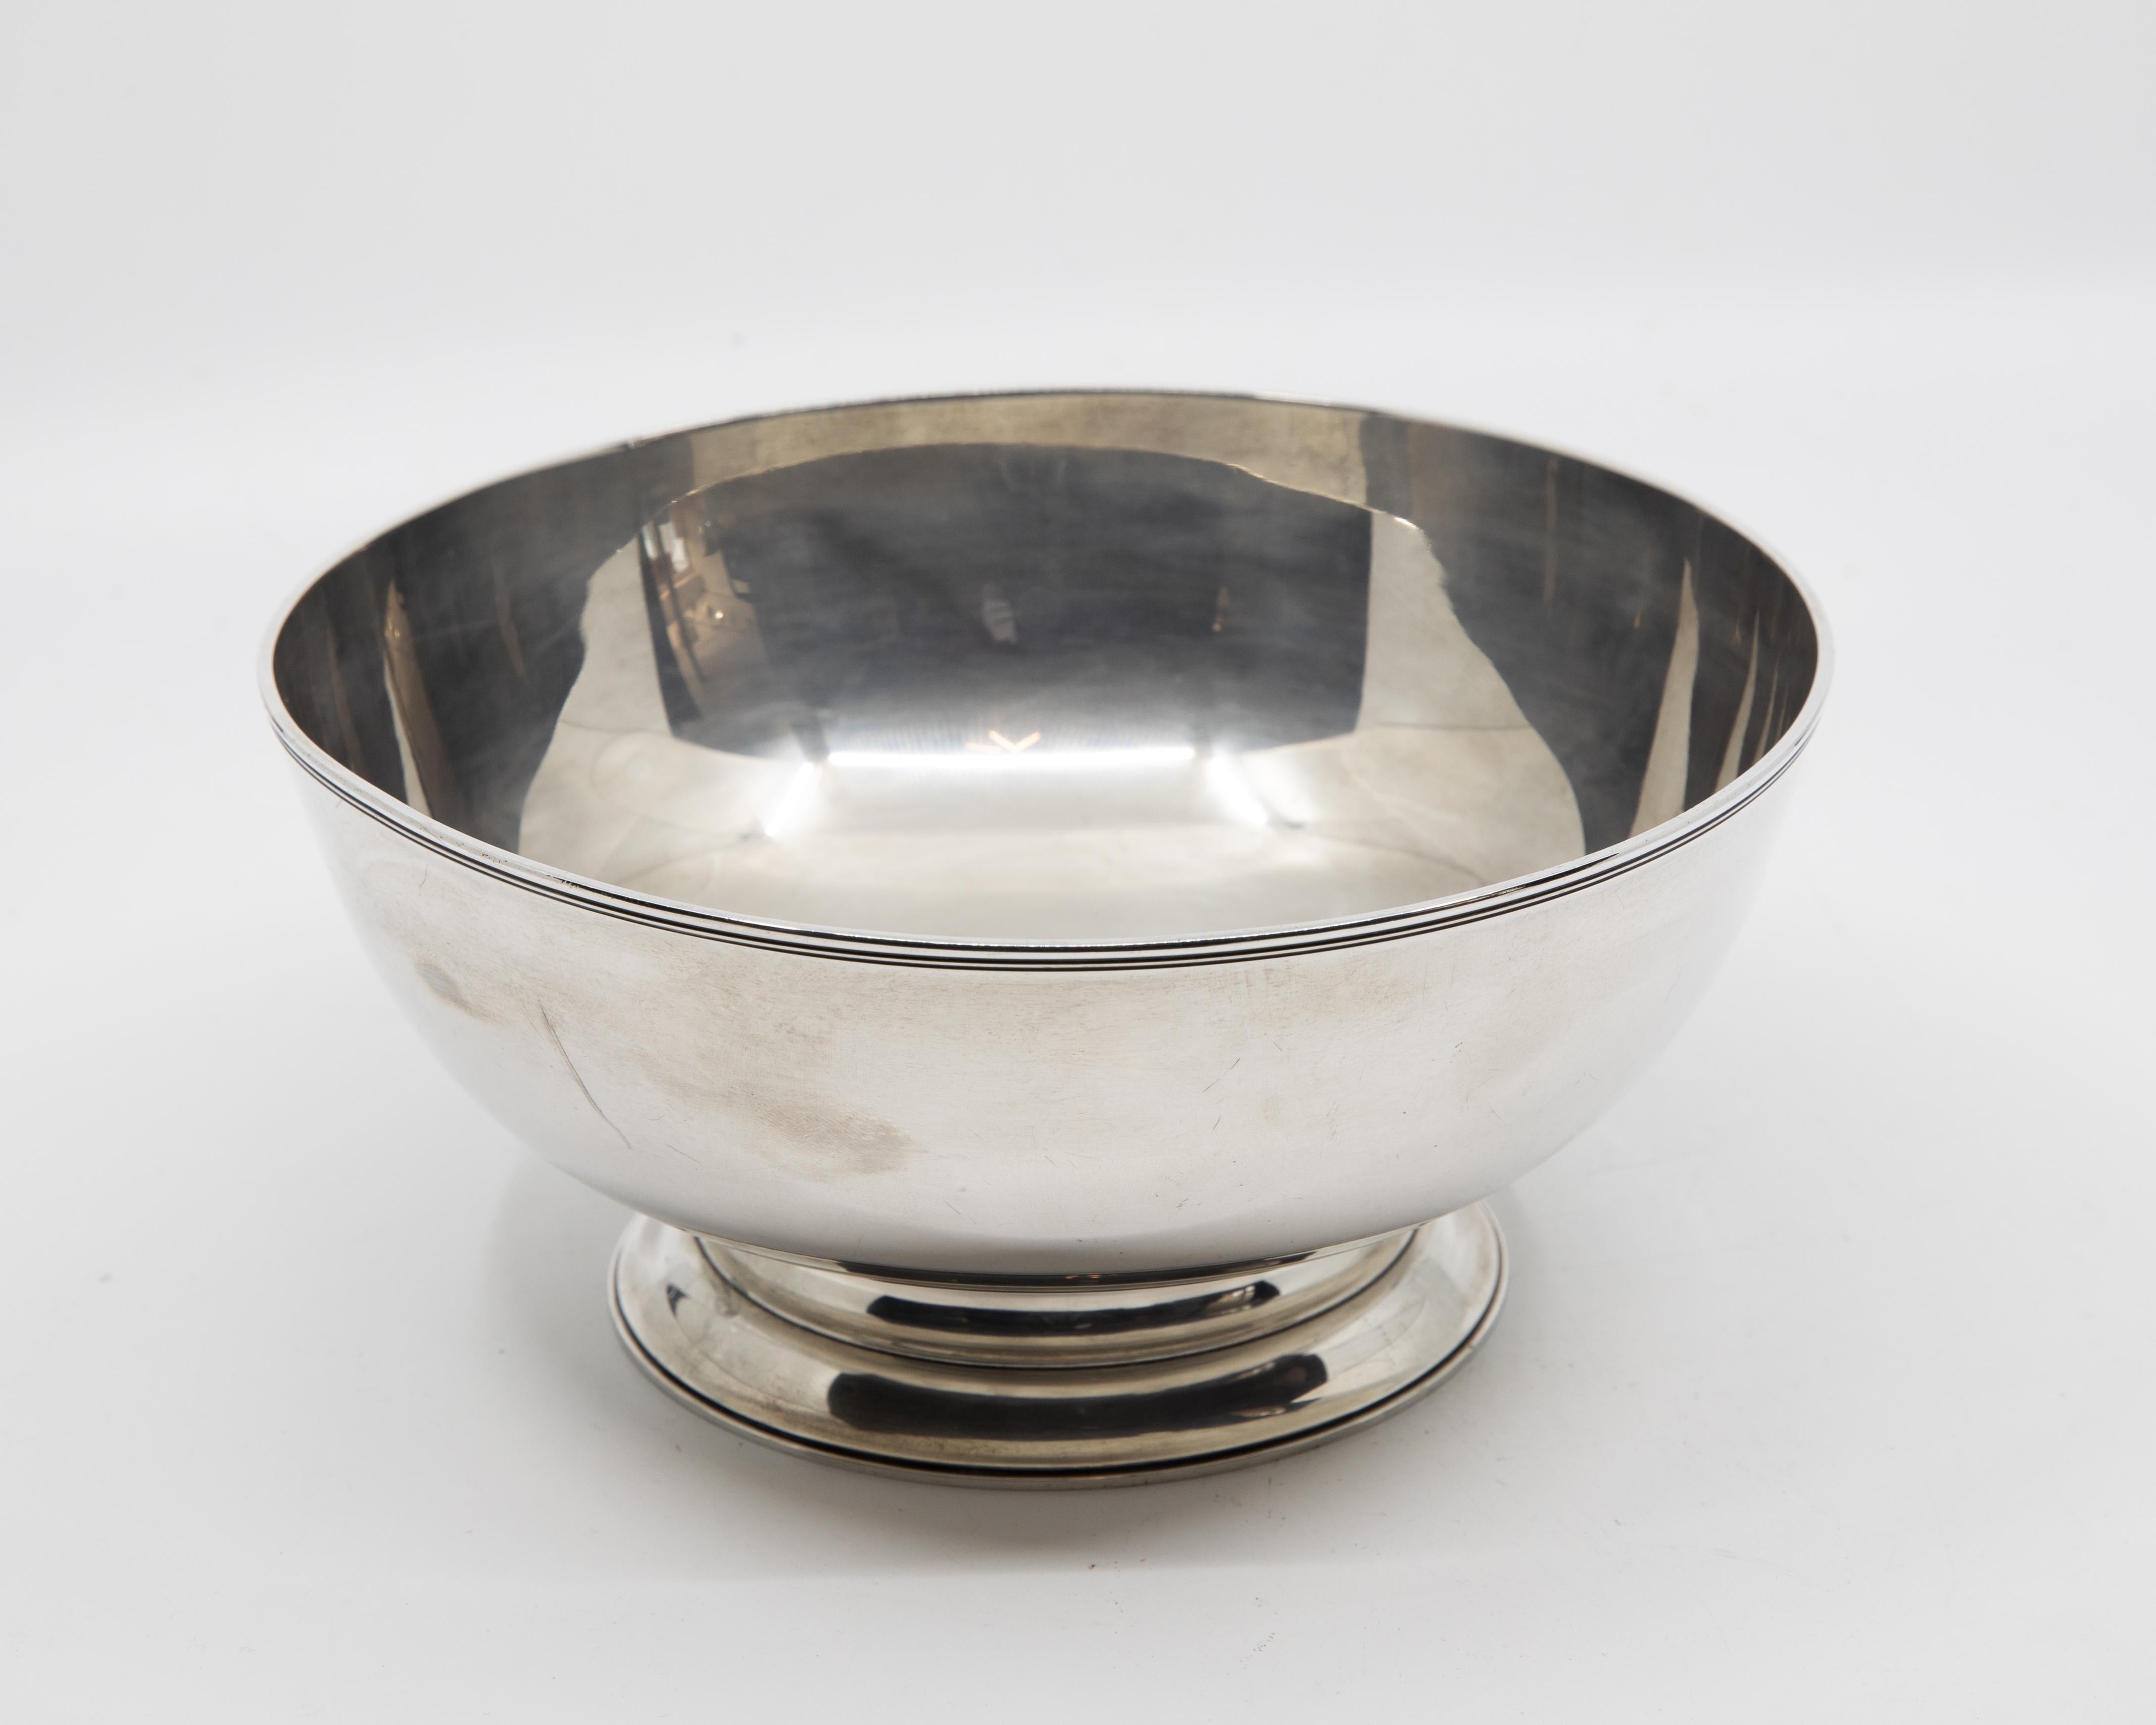 Tiffany & Co sterling silver footed bowl marked Federal-style sterling silver bowl. Made by Tiffany & Co. in New York. Bowl has curved sides, reeded rim, and stepped foot. Spare Classicism after a historic prototype. Hallmark includes pattern no.